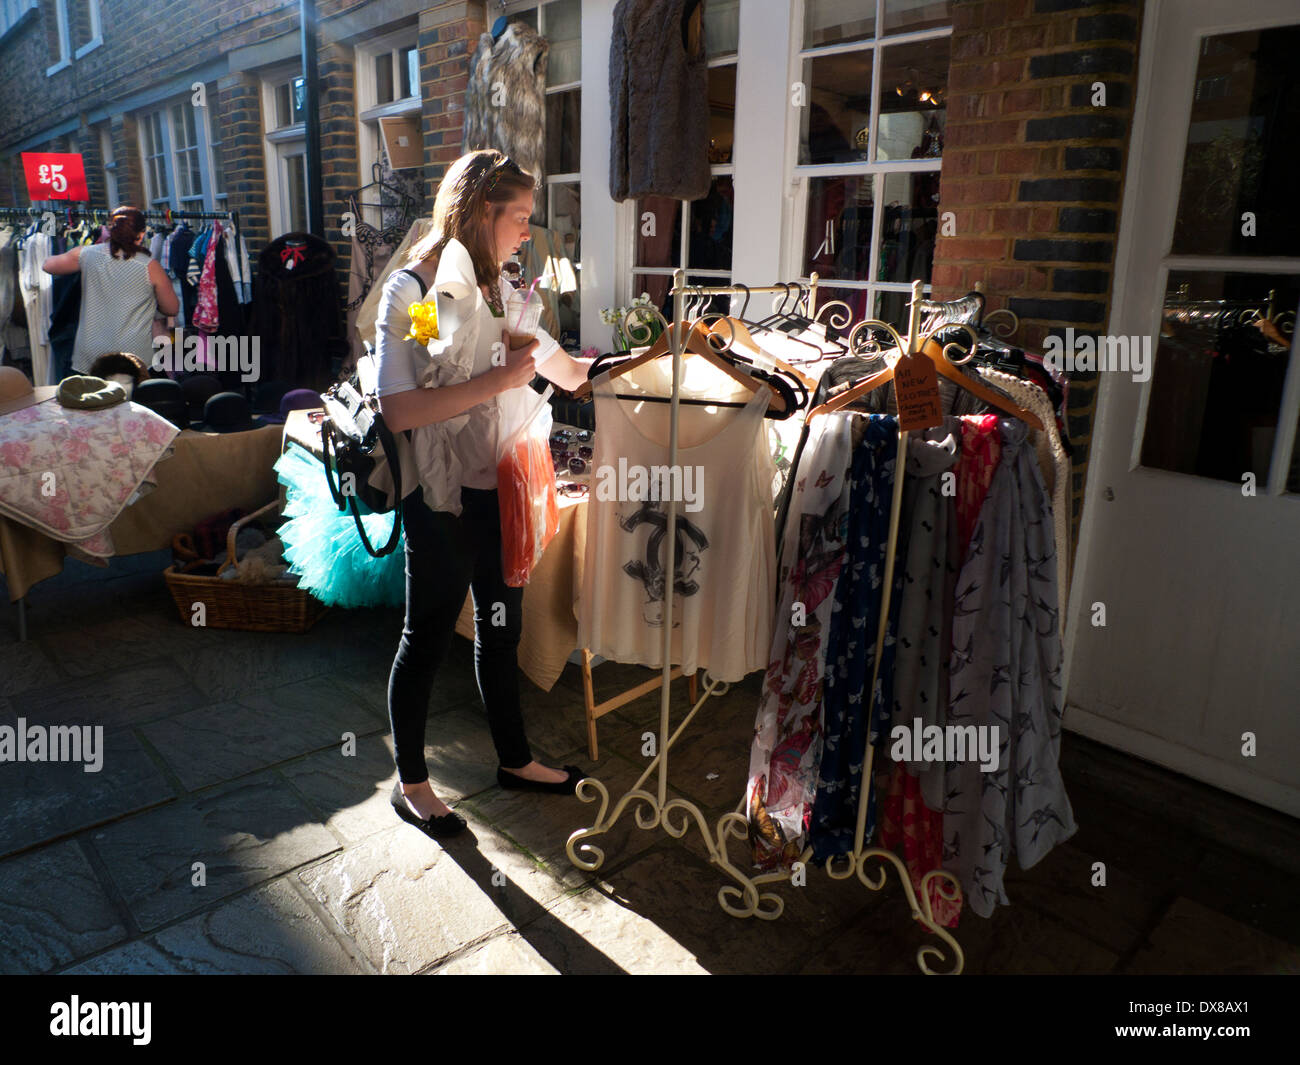 A young woman browsing in a second hand clothing shop at Columbia Road Flower Market London E2 UK KATHY DEWITT Stock Photo